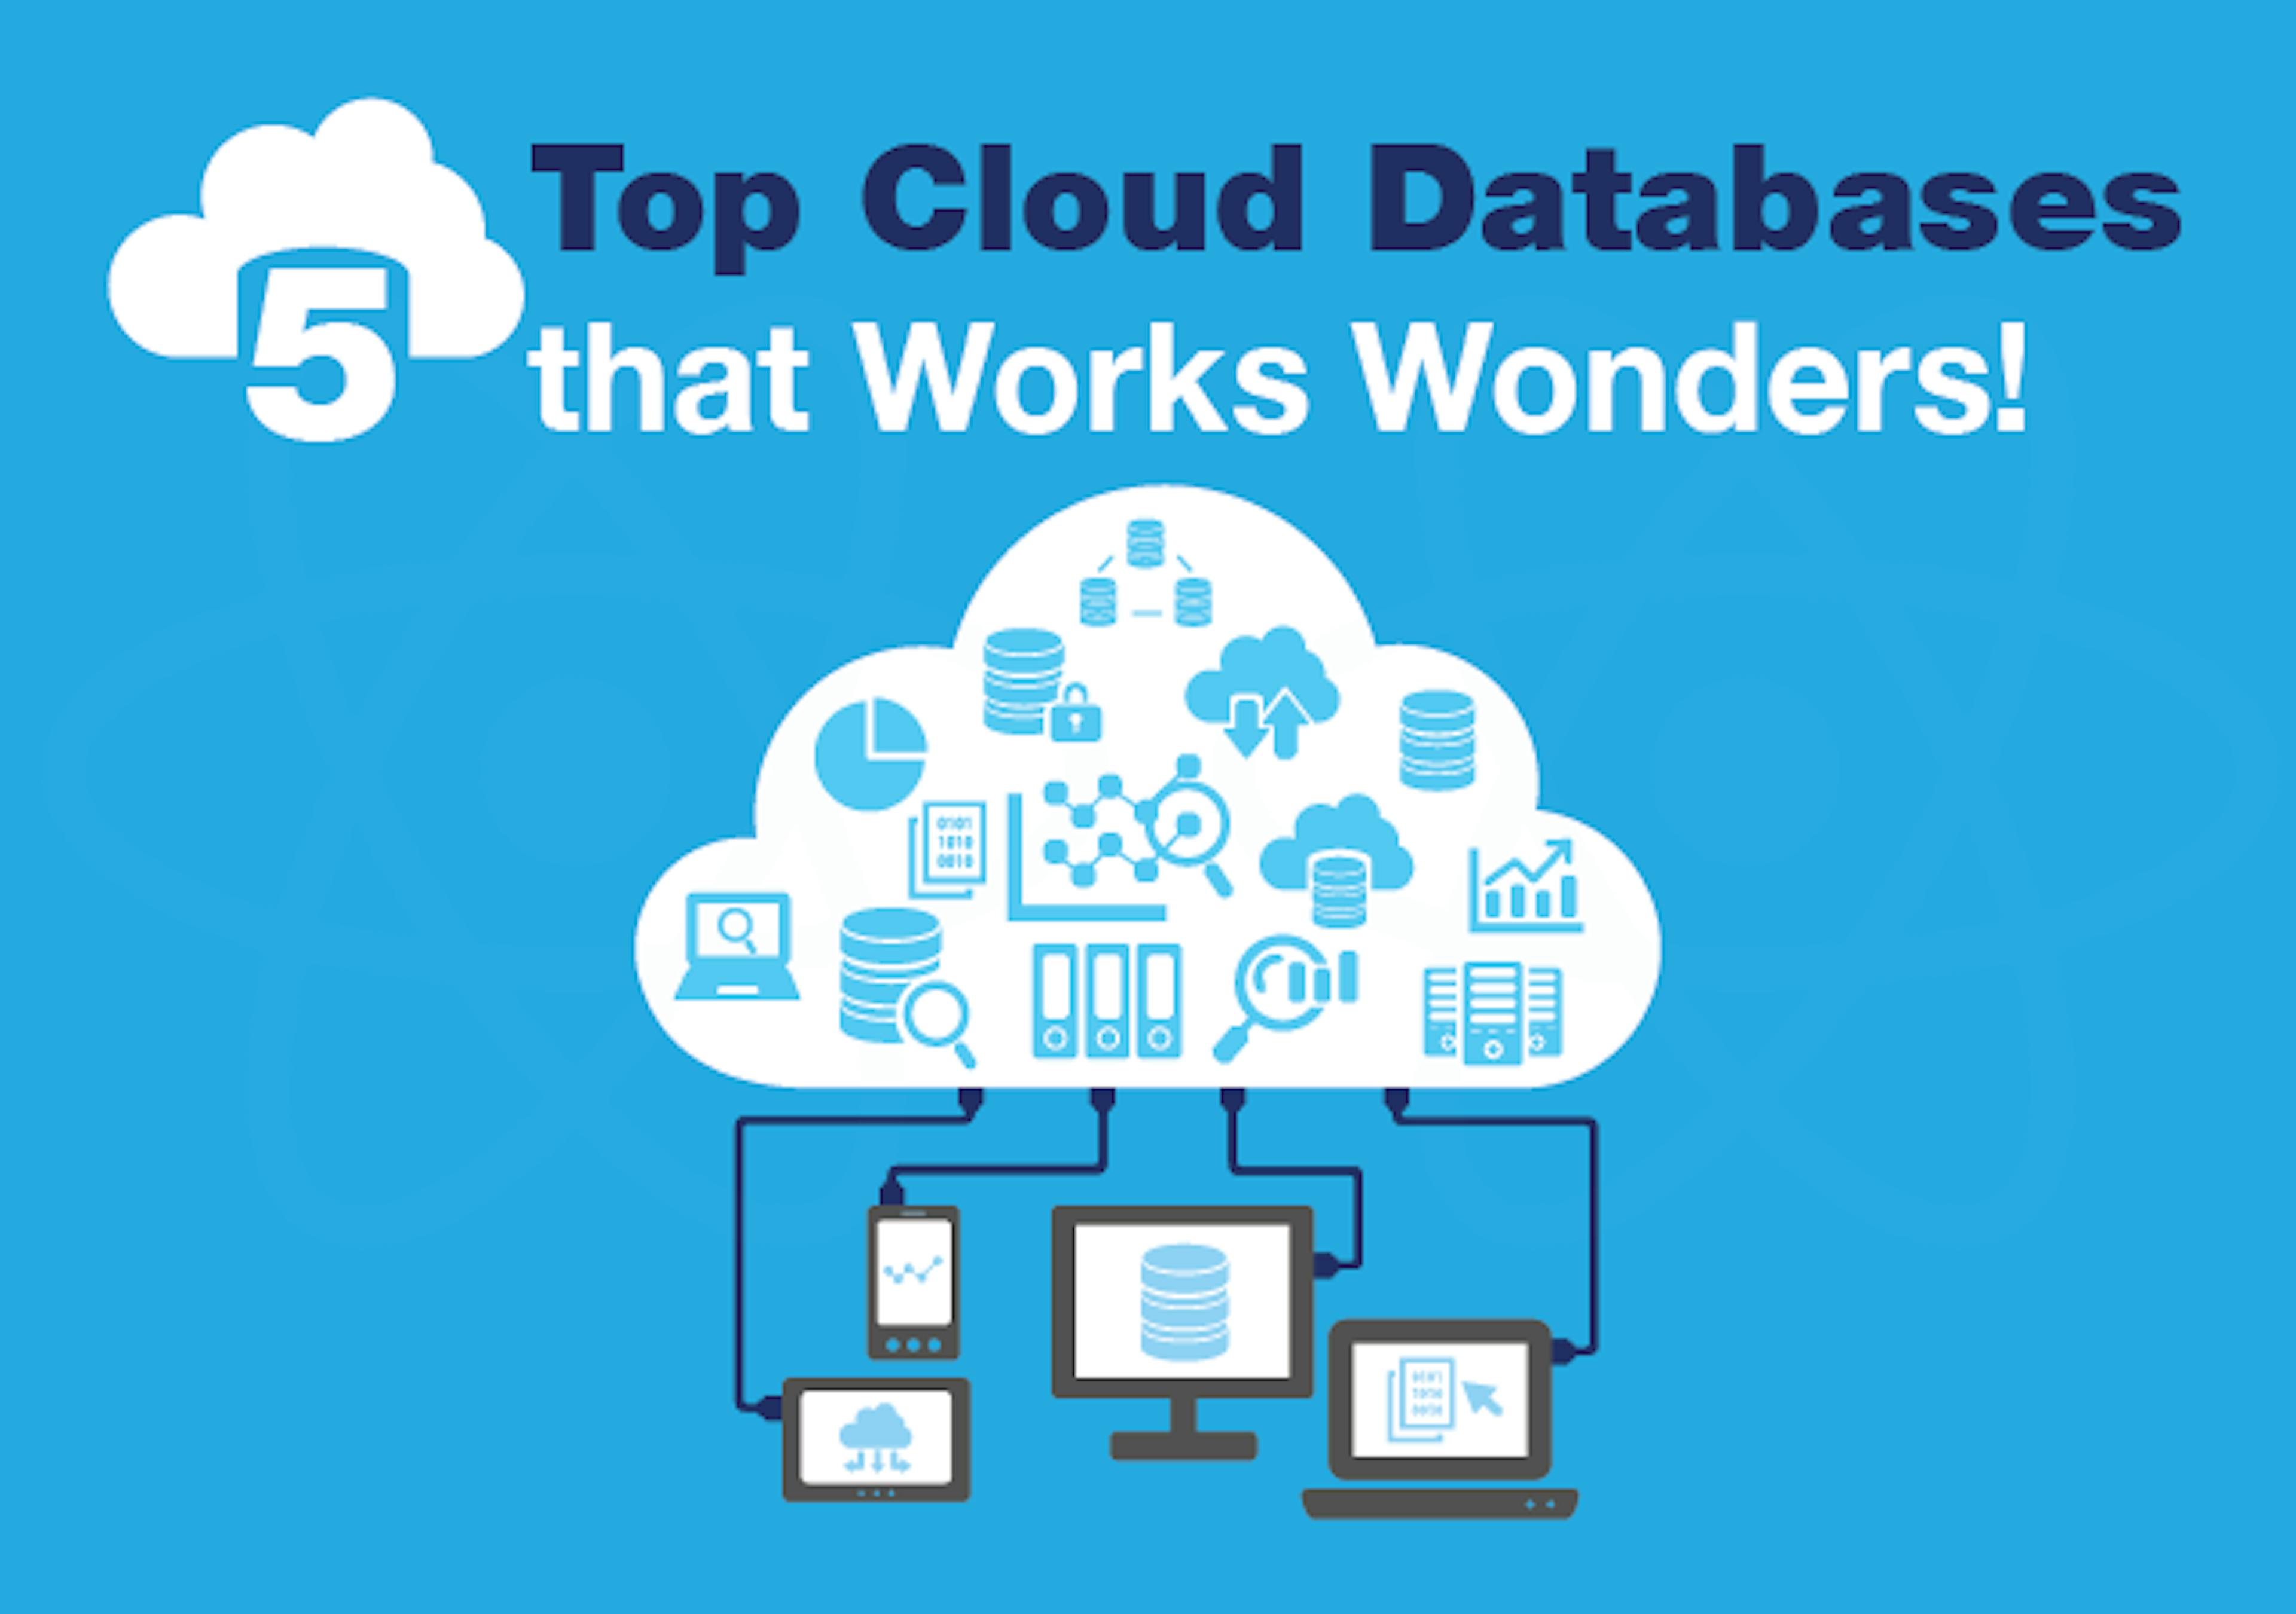 /5-top-cloud-databases-that-works-wonders-7e628810e3ac feature image